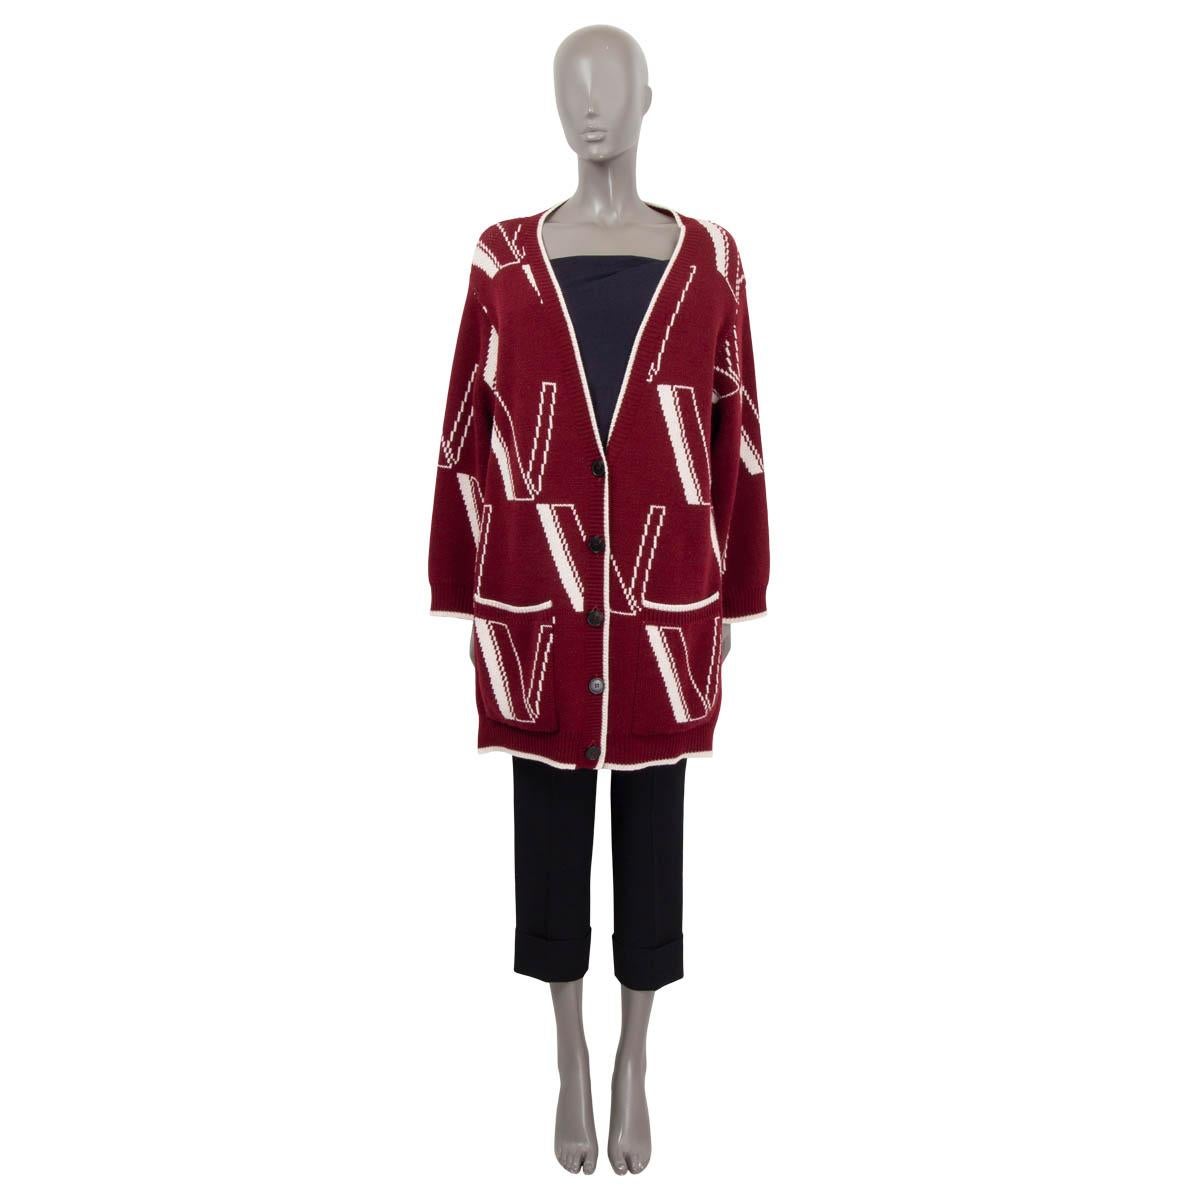 100% authentic Valentino oversized long VLogo cardigan in burgundy and white virgin wool (70%) and cashmere (30%). The design features intarsia-knit, drop shoulder, front button fastening and a very deep v-neck. Has been worn and is in excellent